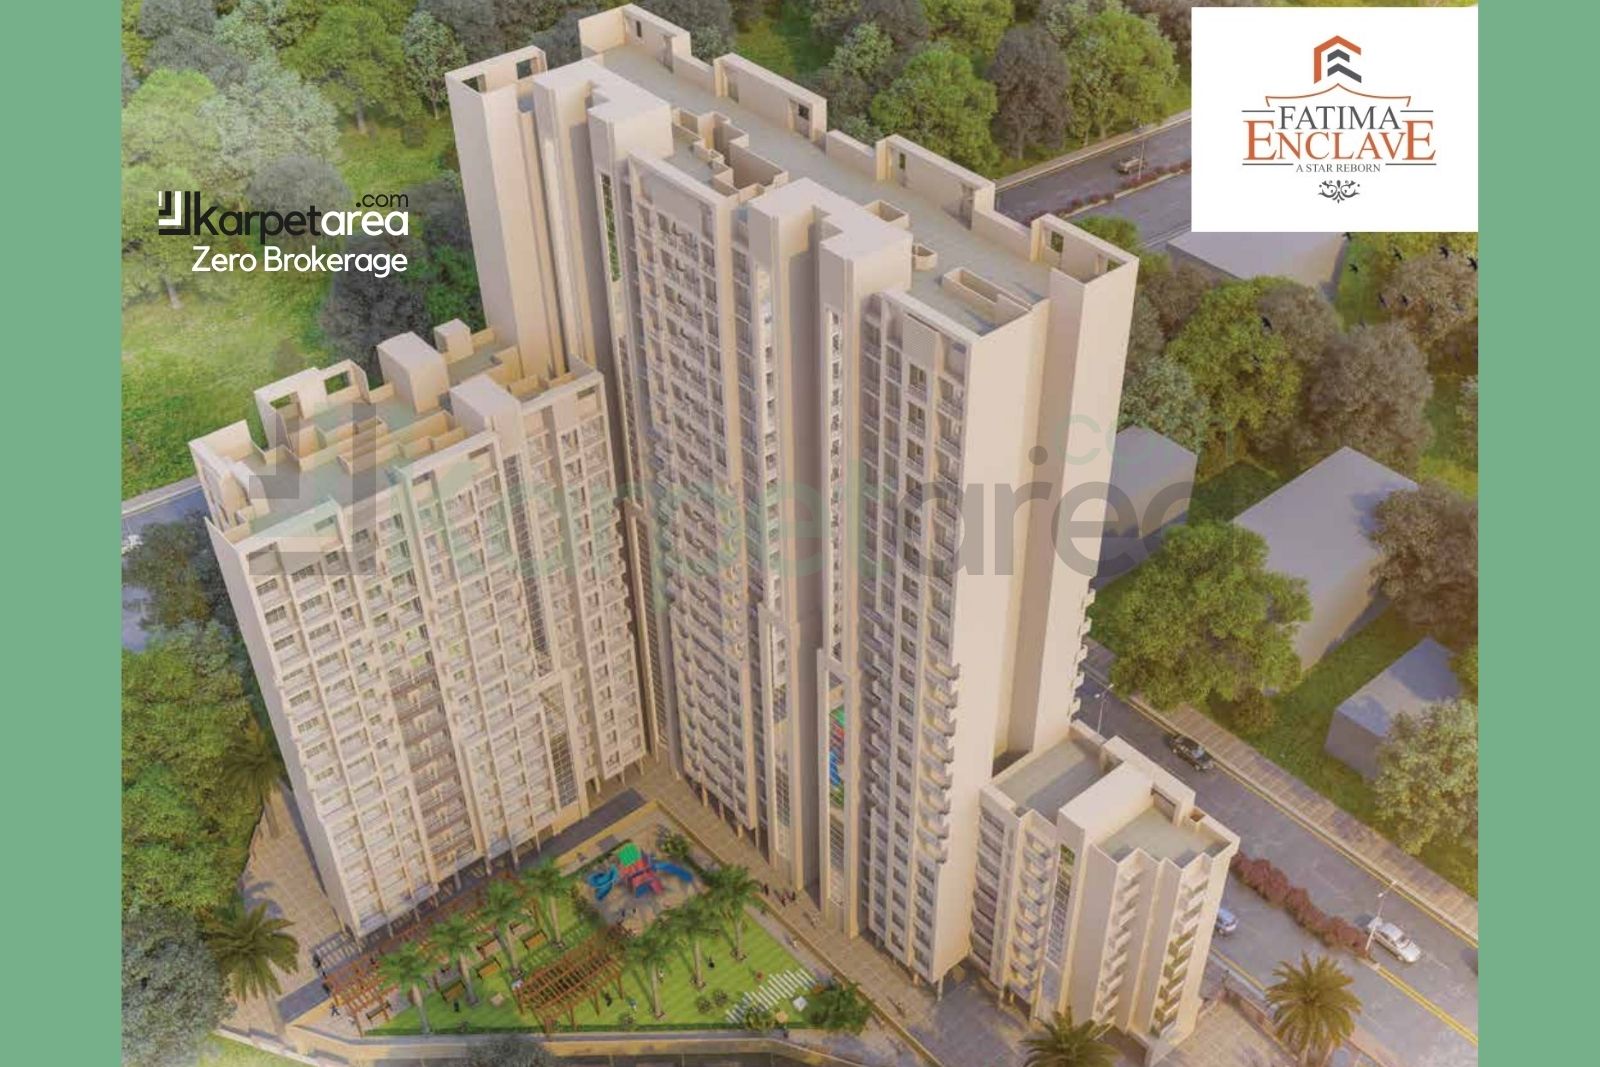 1 BHK, 2 BHK & 3 BHK Modern Apartments For Sale at Fatima Enclave, Mumbra, Thane - 400612